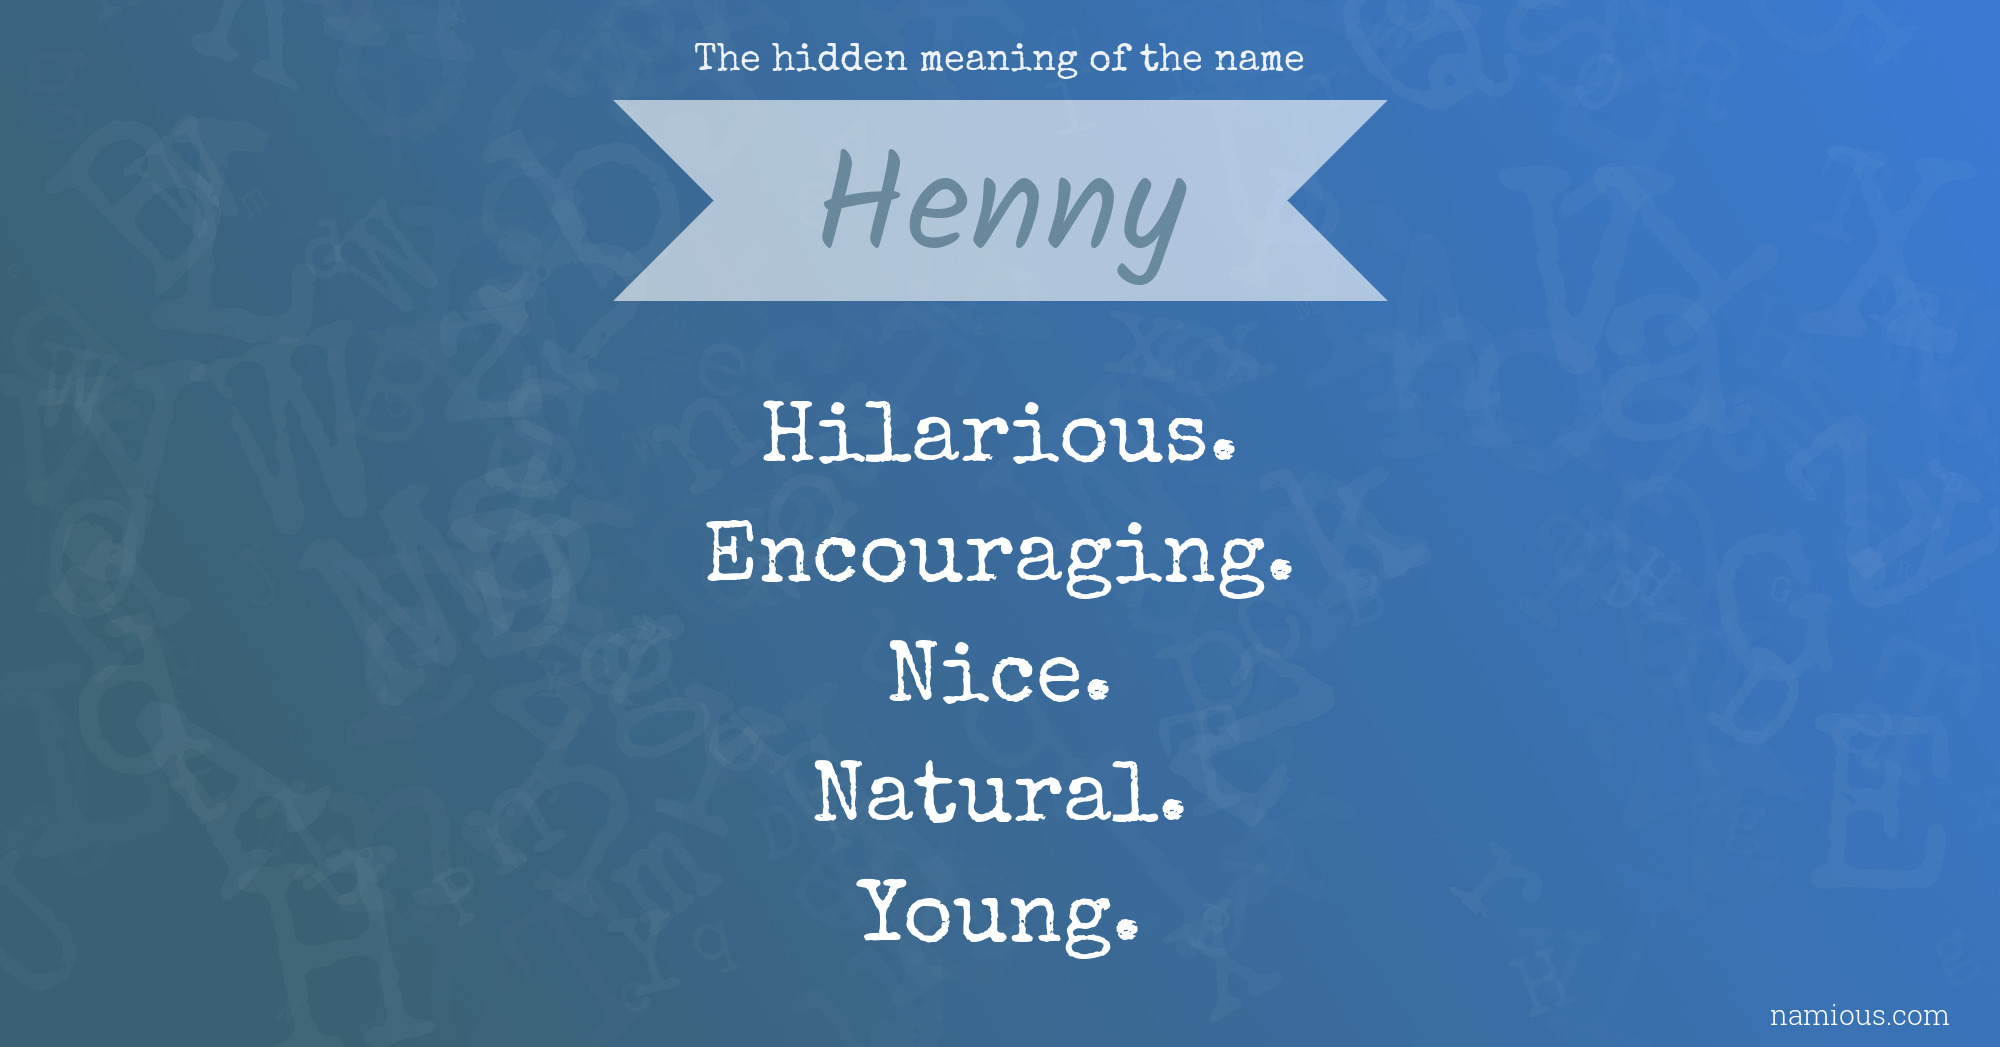 The hidden meaning of the name Henny